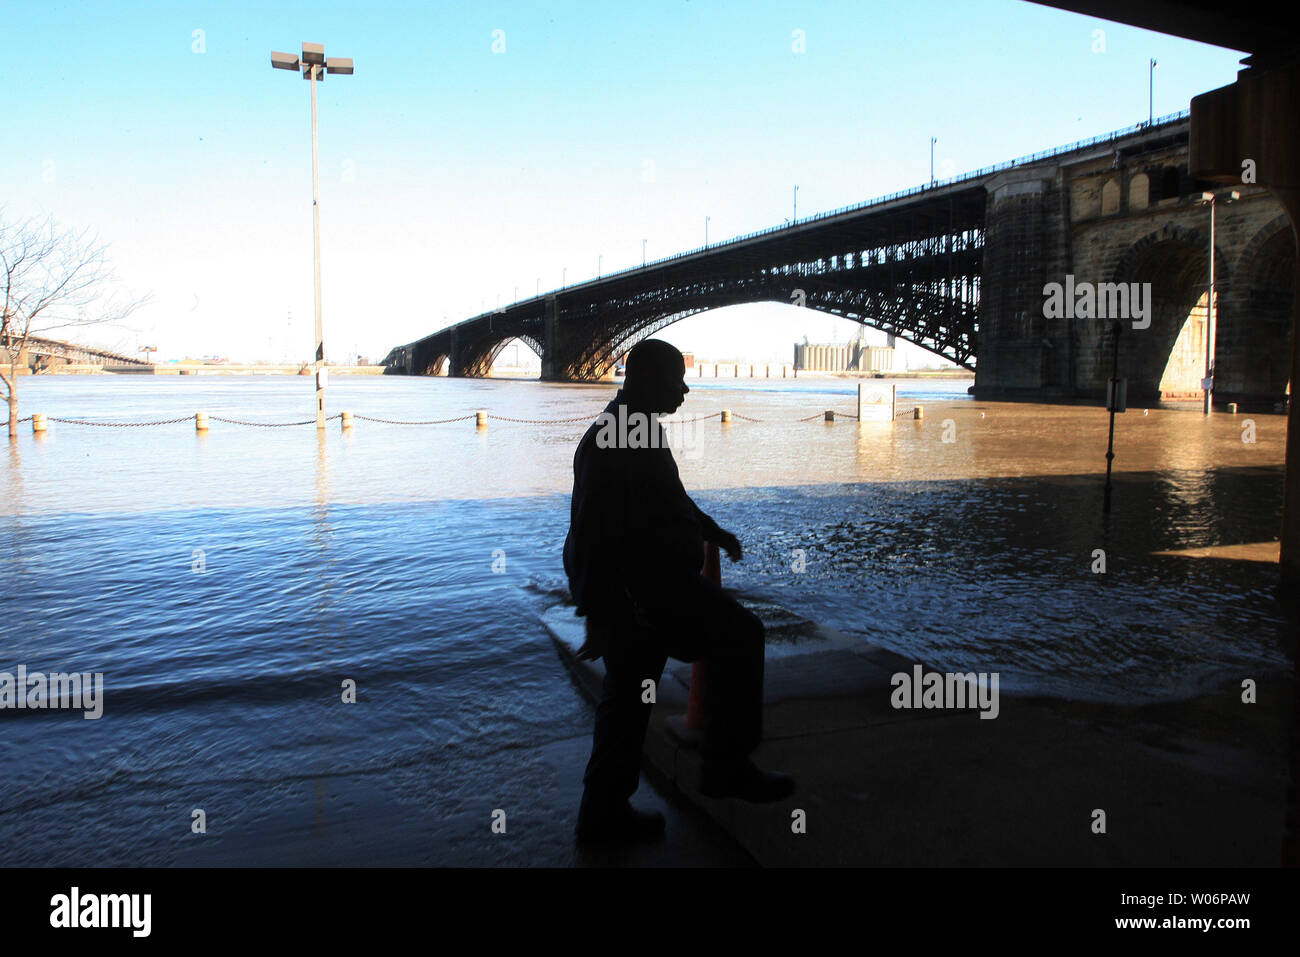 A visitor to the St. Louis riverfront tries to stay out of the rising flood waters from the Mississippi River on the riverfront in St. Louis on March 30, 2010. The flooding is a natural occurence that happens several days a year due.    UPI/Bill Greenblatt Stock Photo